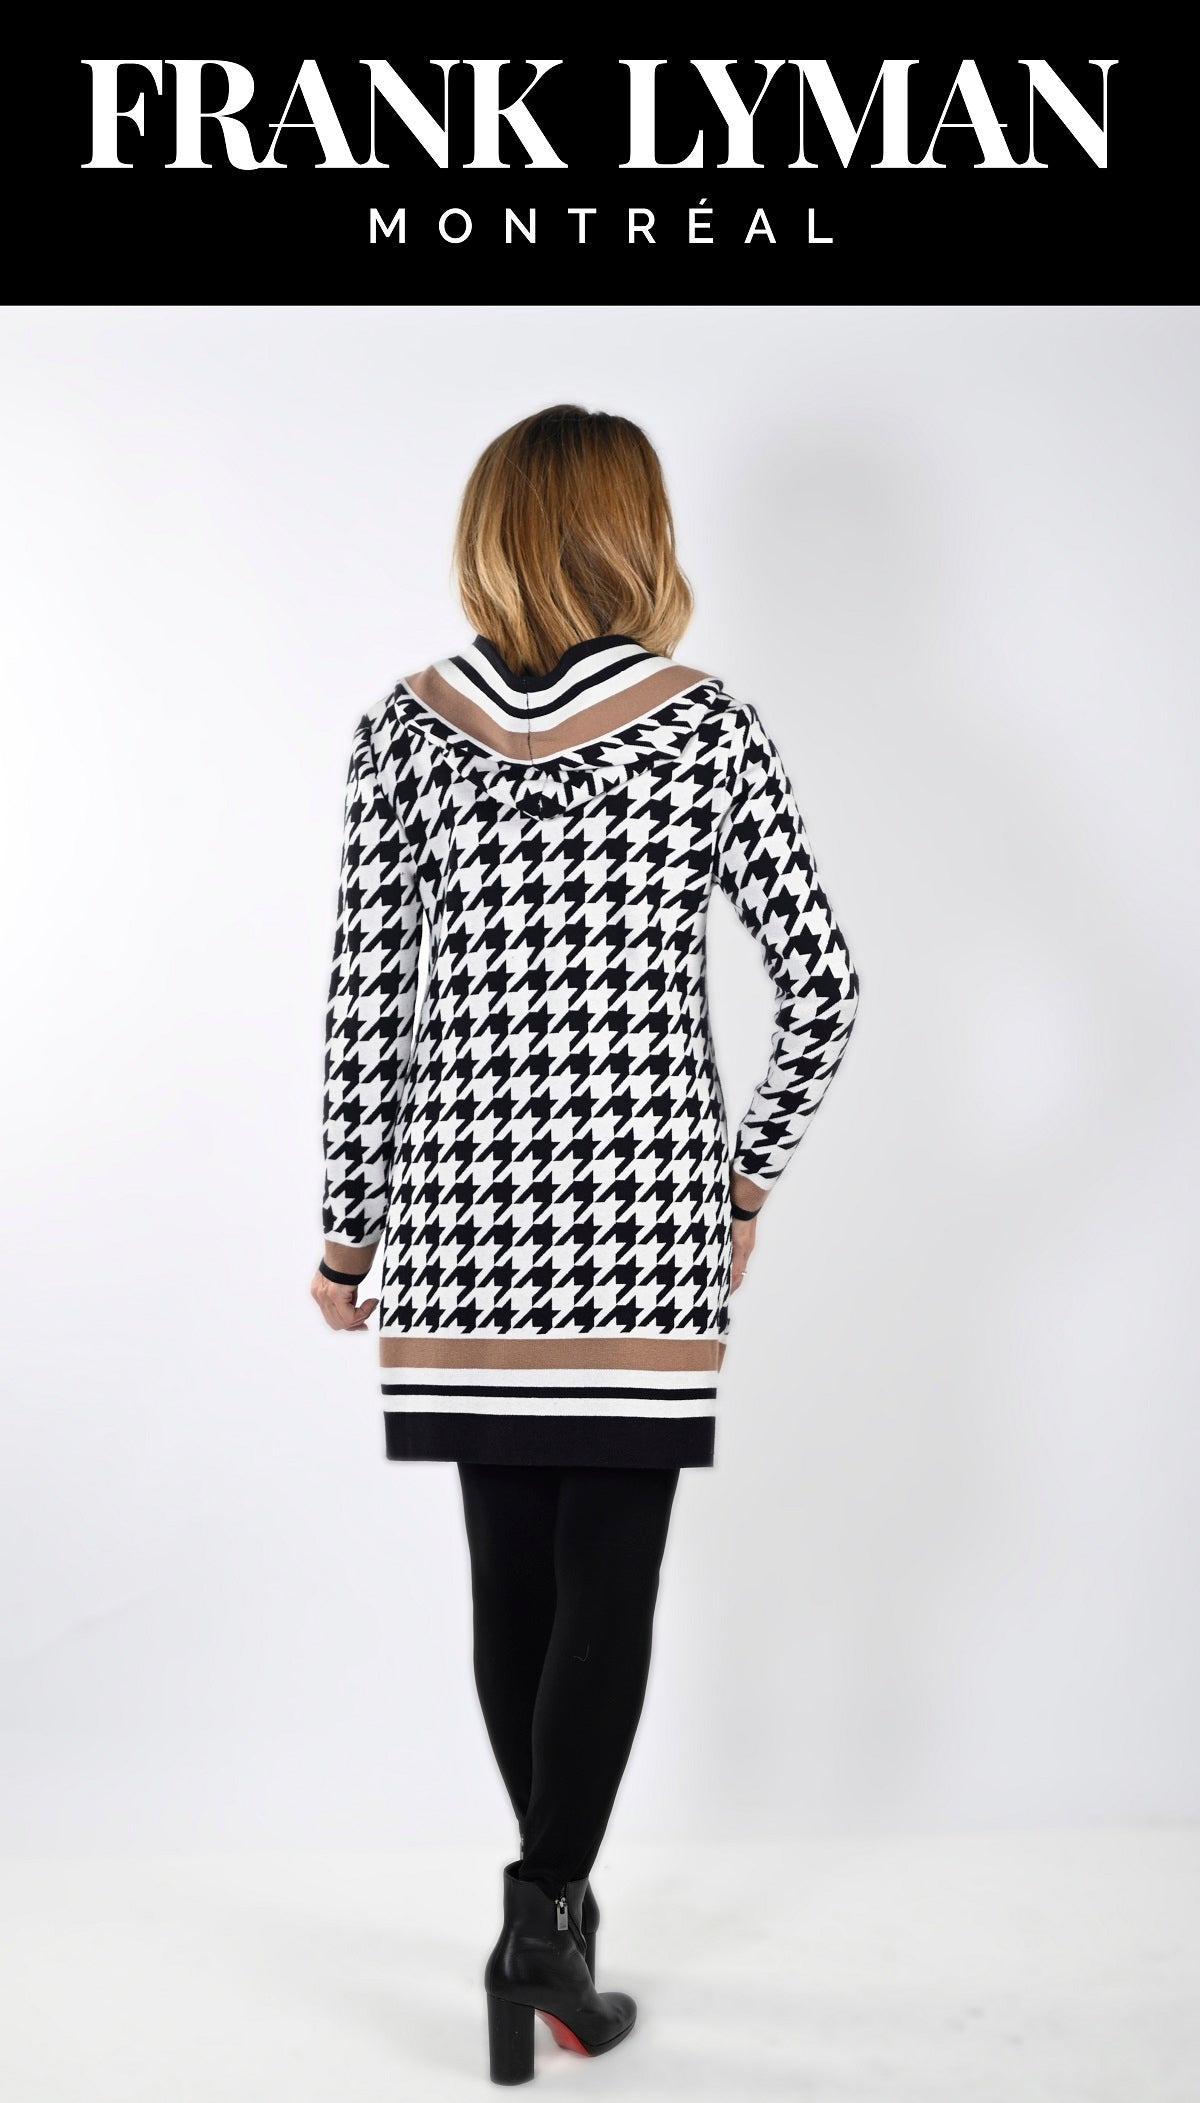 Frank Lyman Montreal Cardigan Sweater-Buy Frank Lyman Montreal Sweaters Online-Frank Lyman Montreal Online Sweaters Shop-Frank Lyman Montreal Fall 2023 Collection